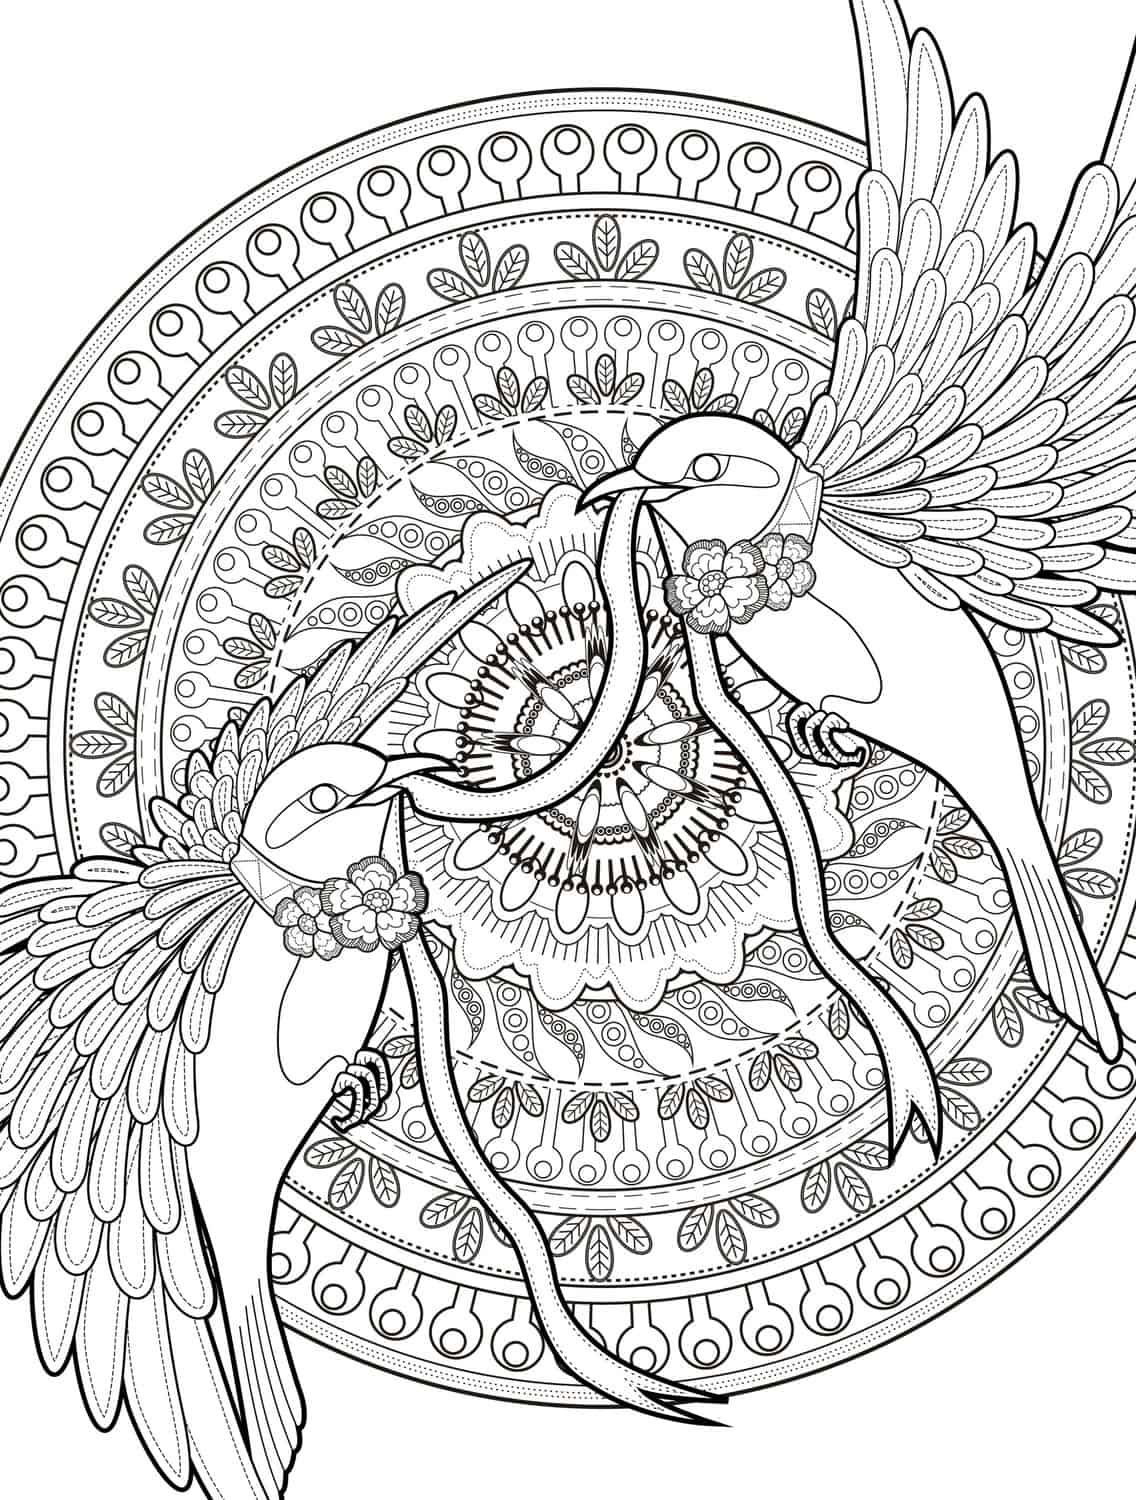 Free Coloring Pages Adults 7